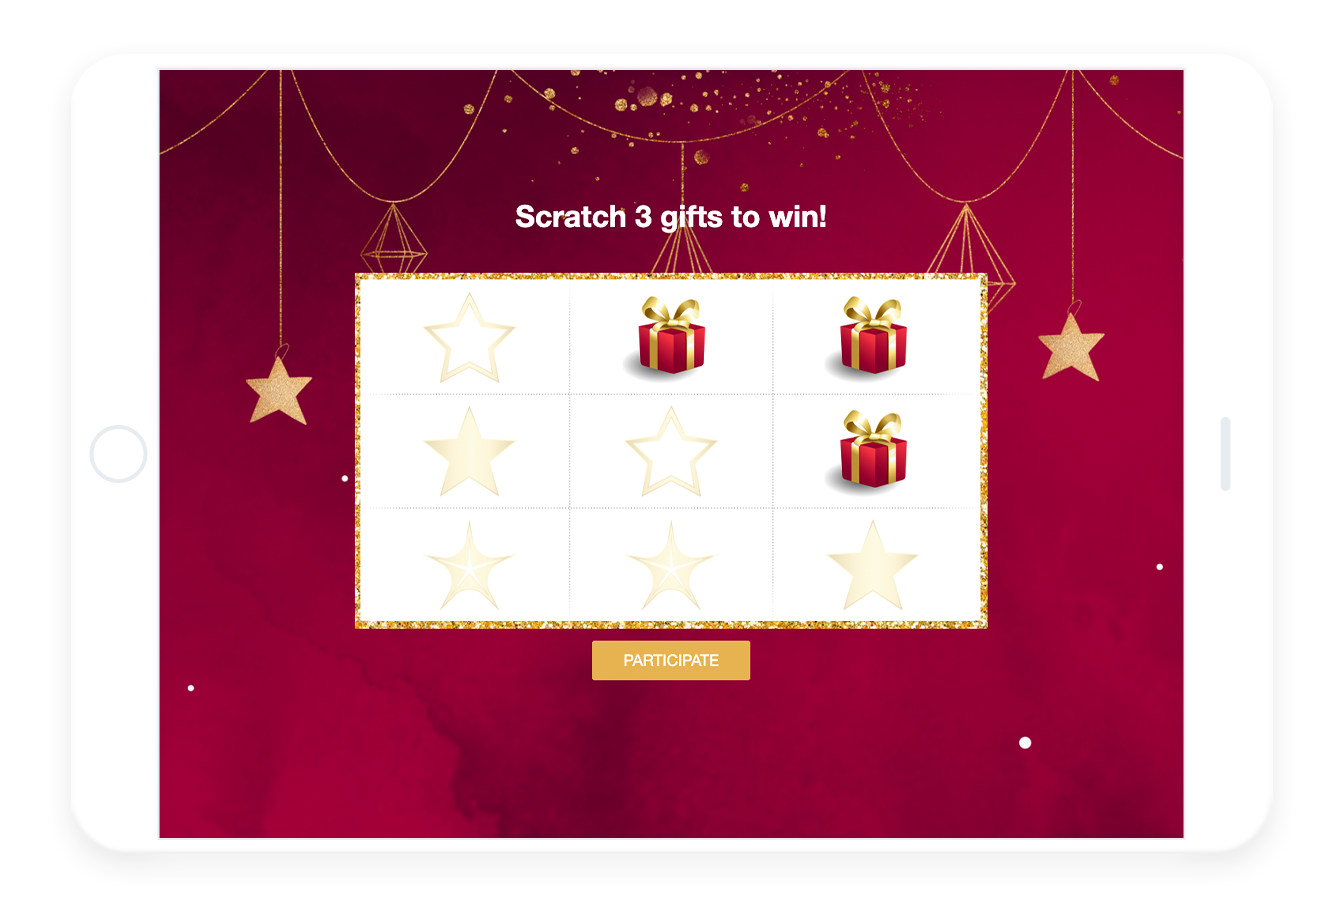 Christmas scratchcard, red background, three presents are already revealed